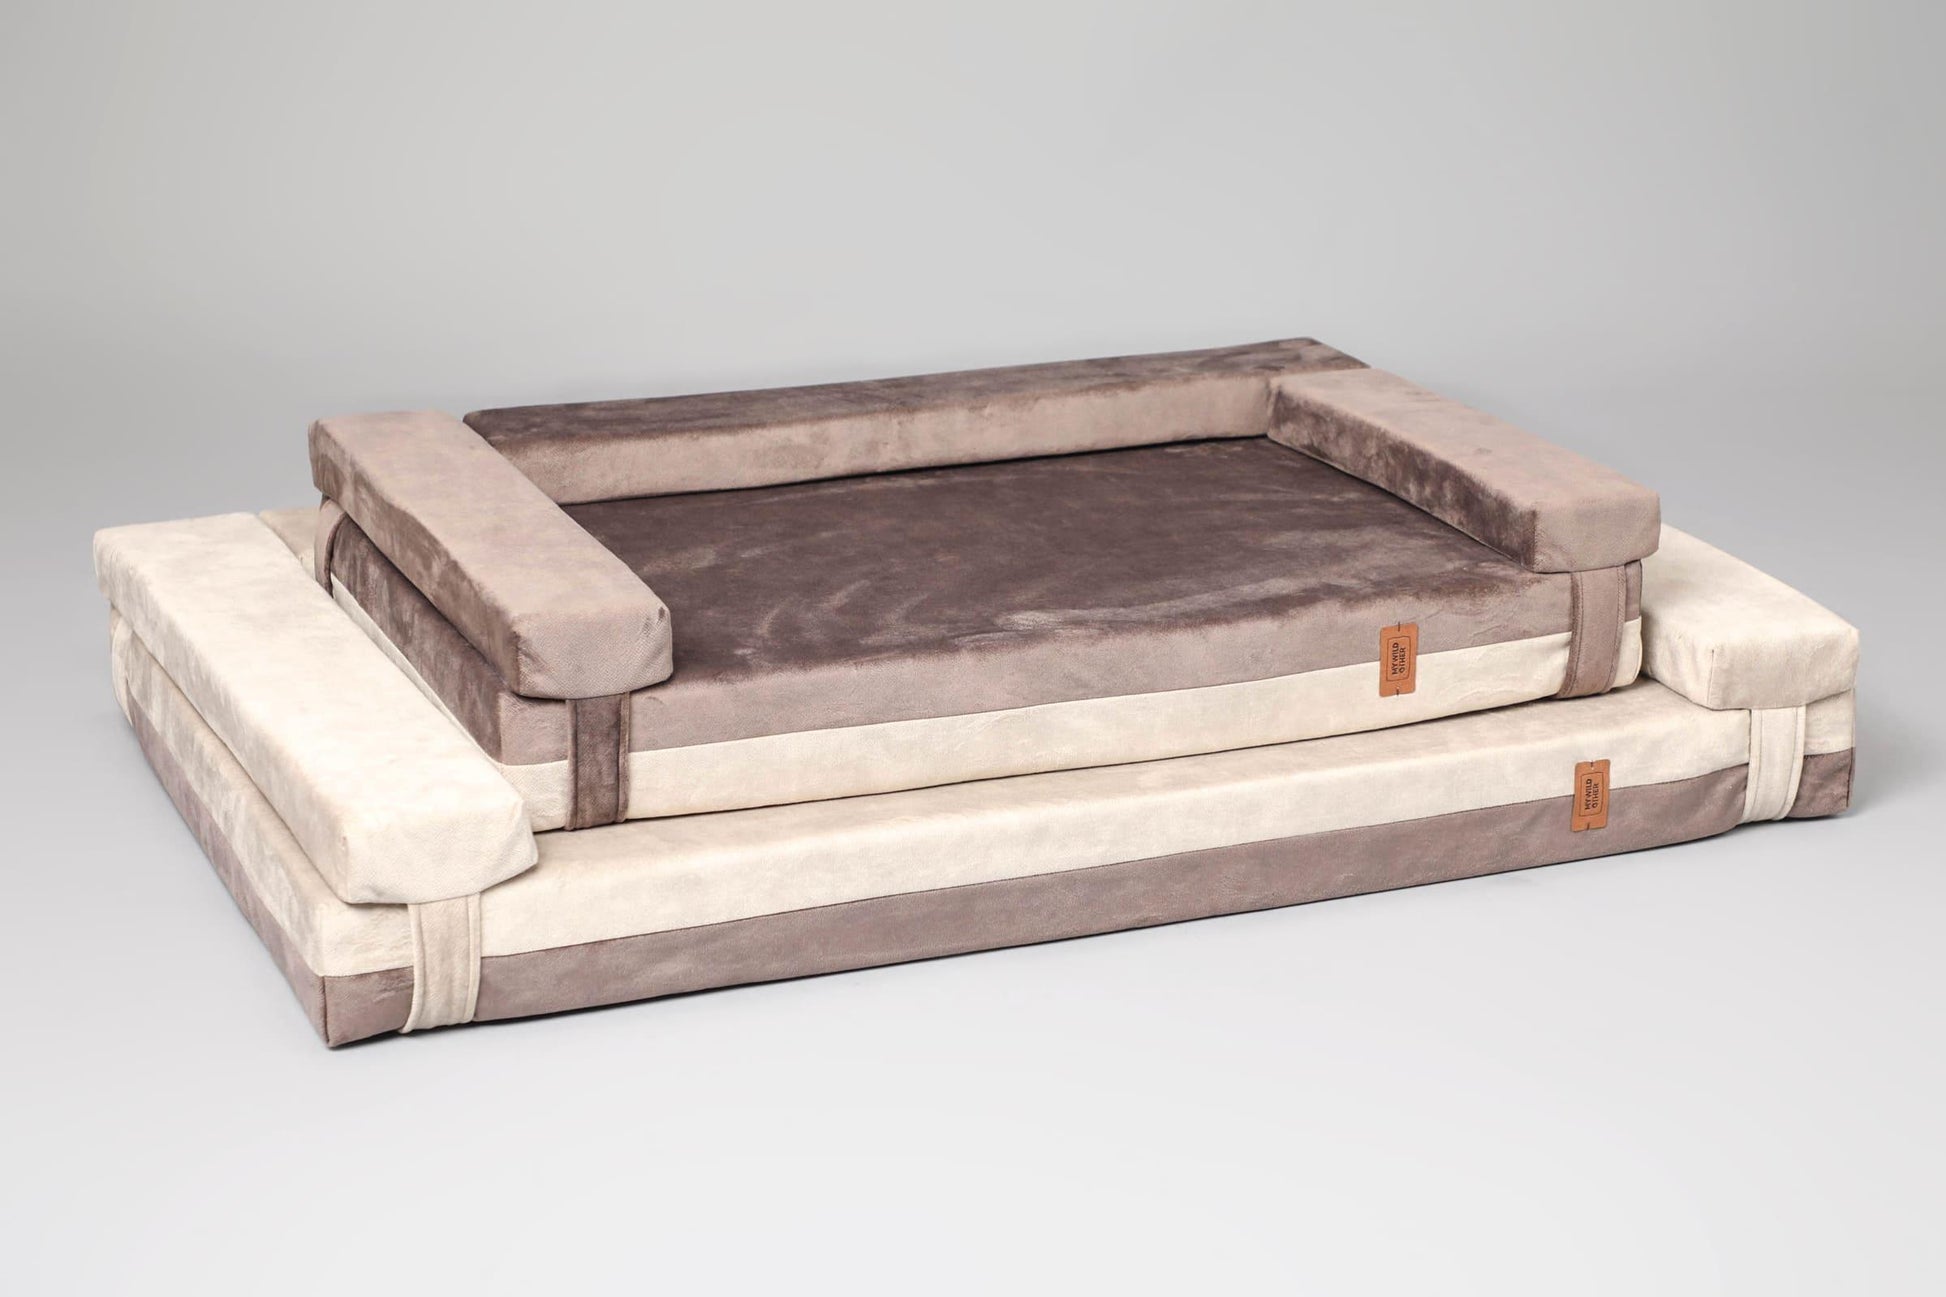 Transformer dog bed | Extra comfort & support | 2-sided | BEIGE+TAUPE - premium dog goods handmade in Europe by animalistus